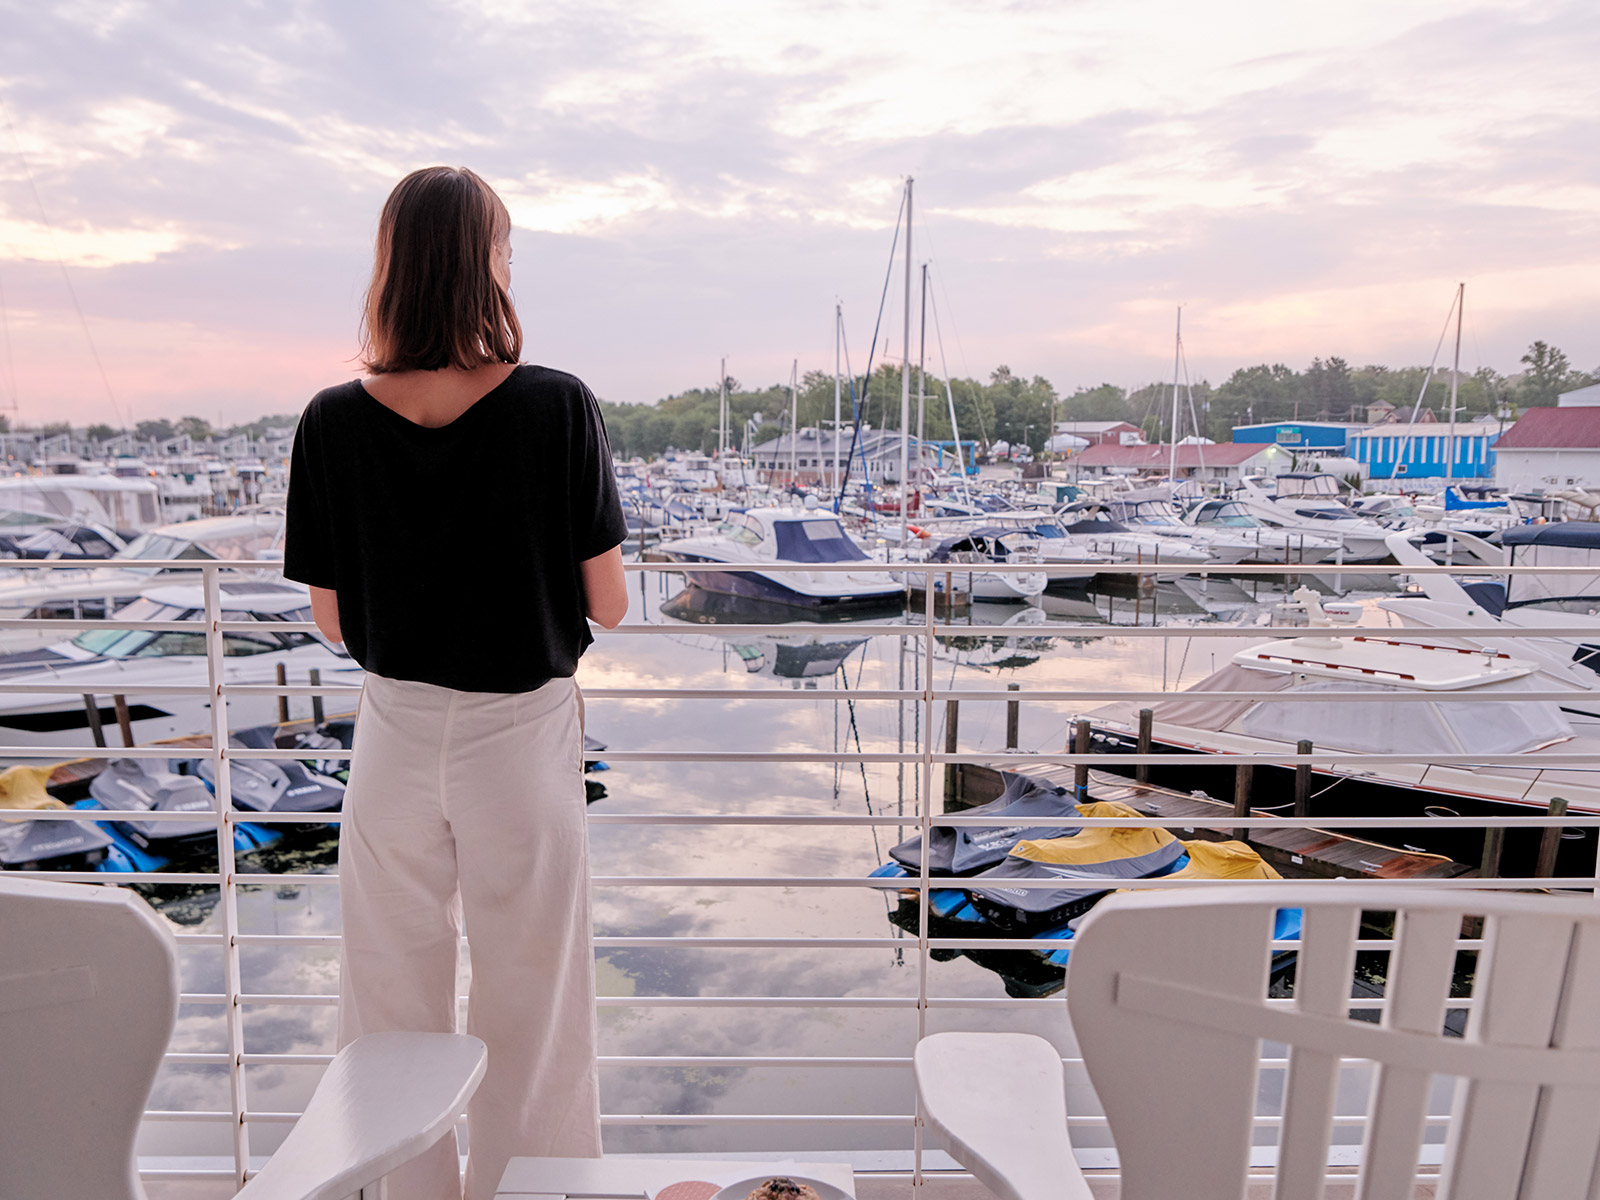 Woman looking out from balcony over pink skies and view of boats in a marina